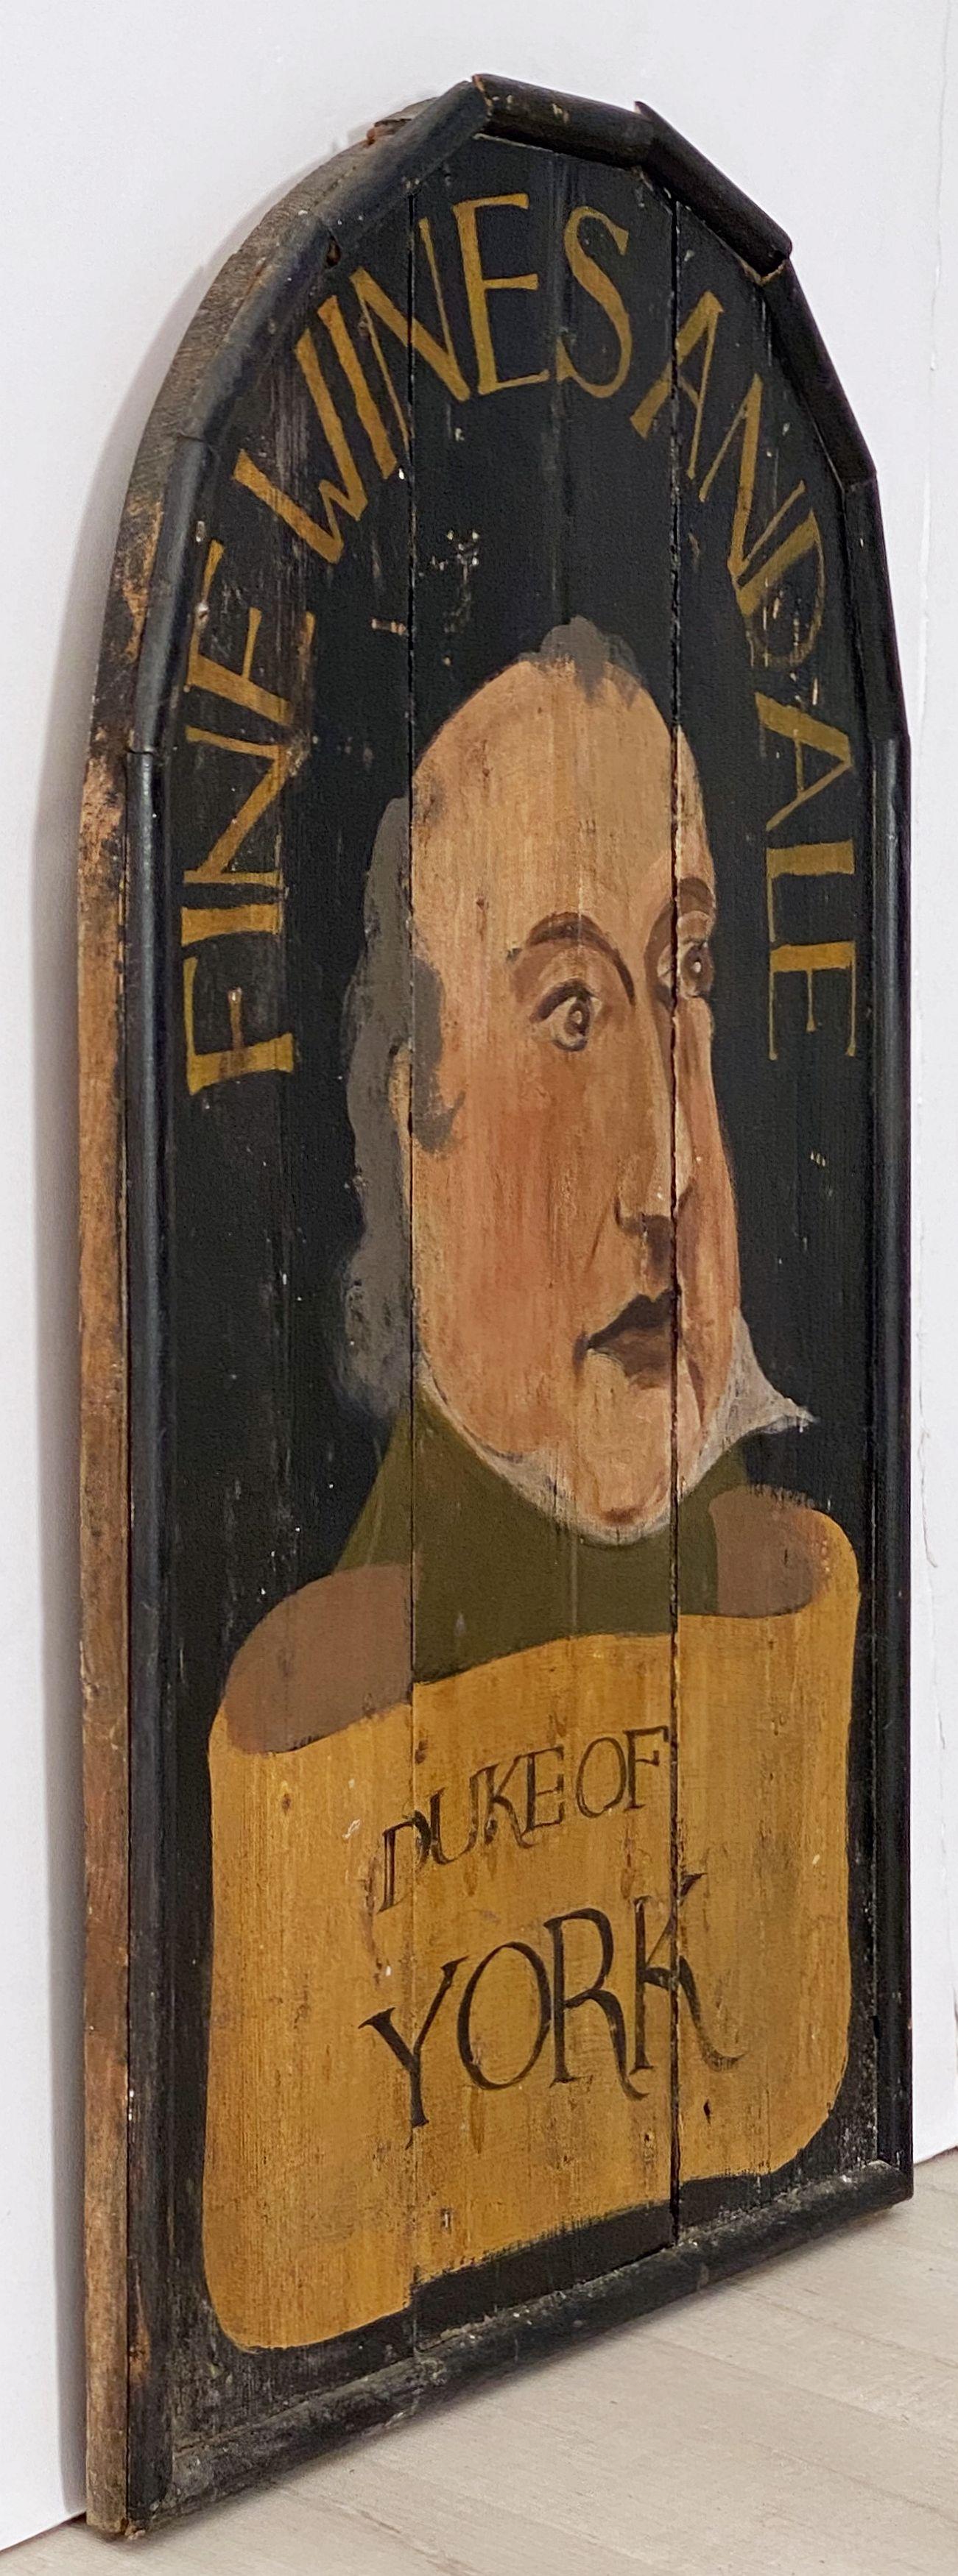 An authentic English pub sign (one-sided) featuring a portrait painting of a former Duke of York, entitled: Fine Wines and Ale - Duke of York.

A very fine example of vintage advertising artwork and ready for display.